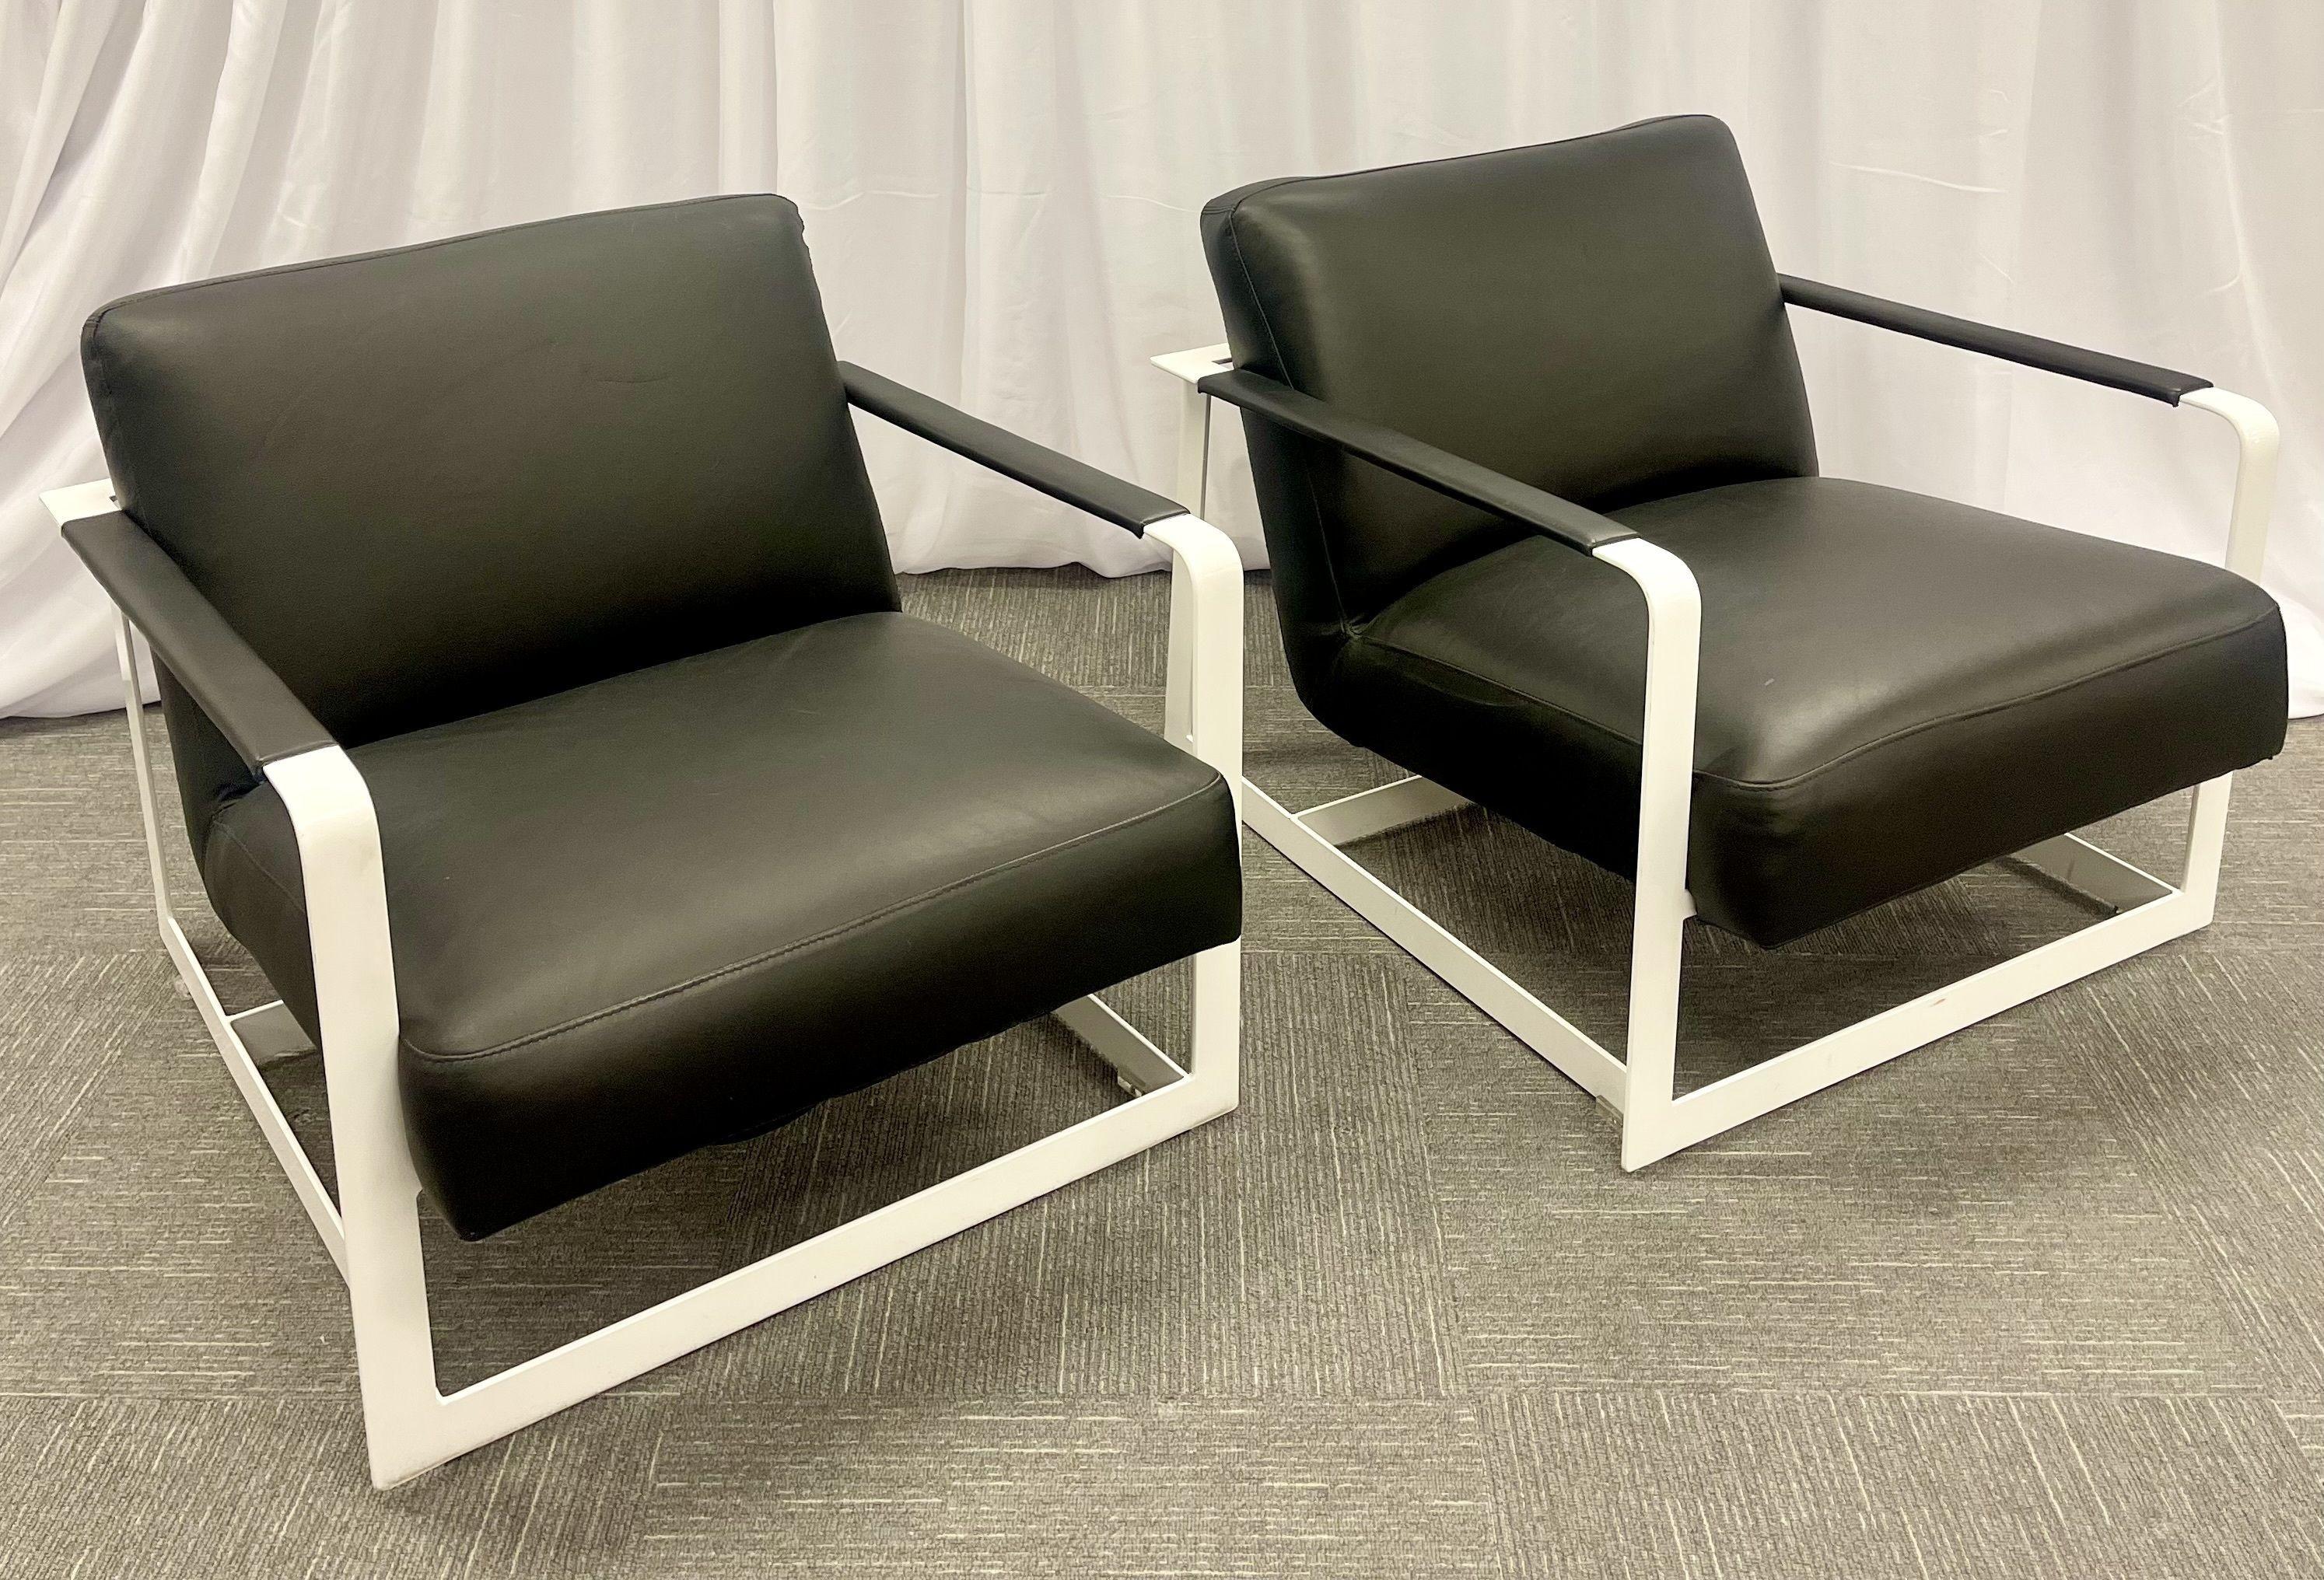 Pair of Mid-Century Modern Lounge Chairs, Leather, Steel Base, American, 1980s For Sale 1